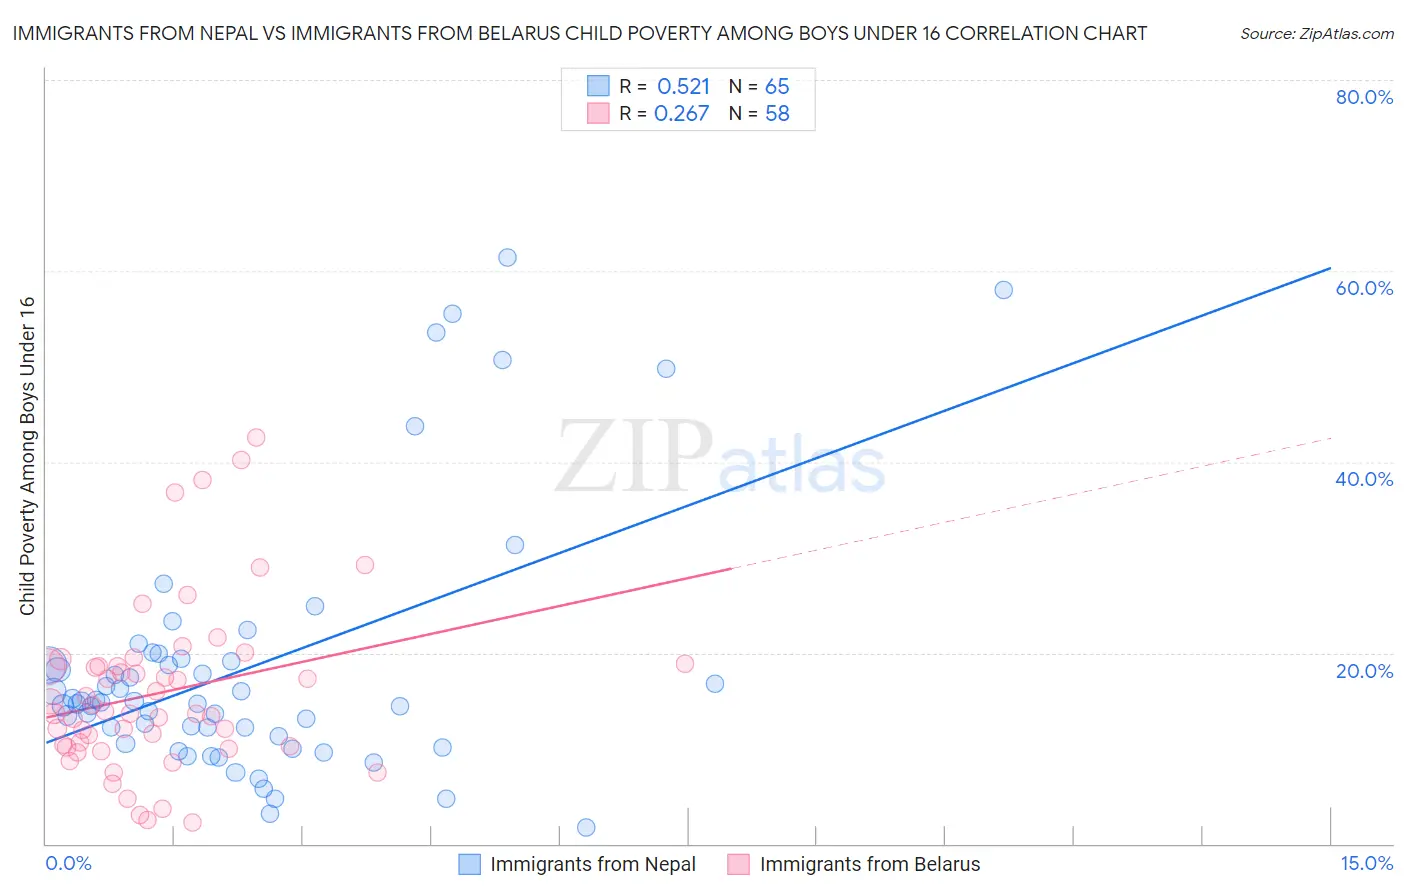 Immigrants from Nepal vs Immigrants from Belarus Child Poverty Among Boys Under 16